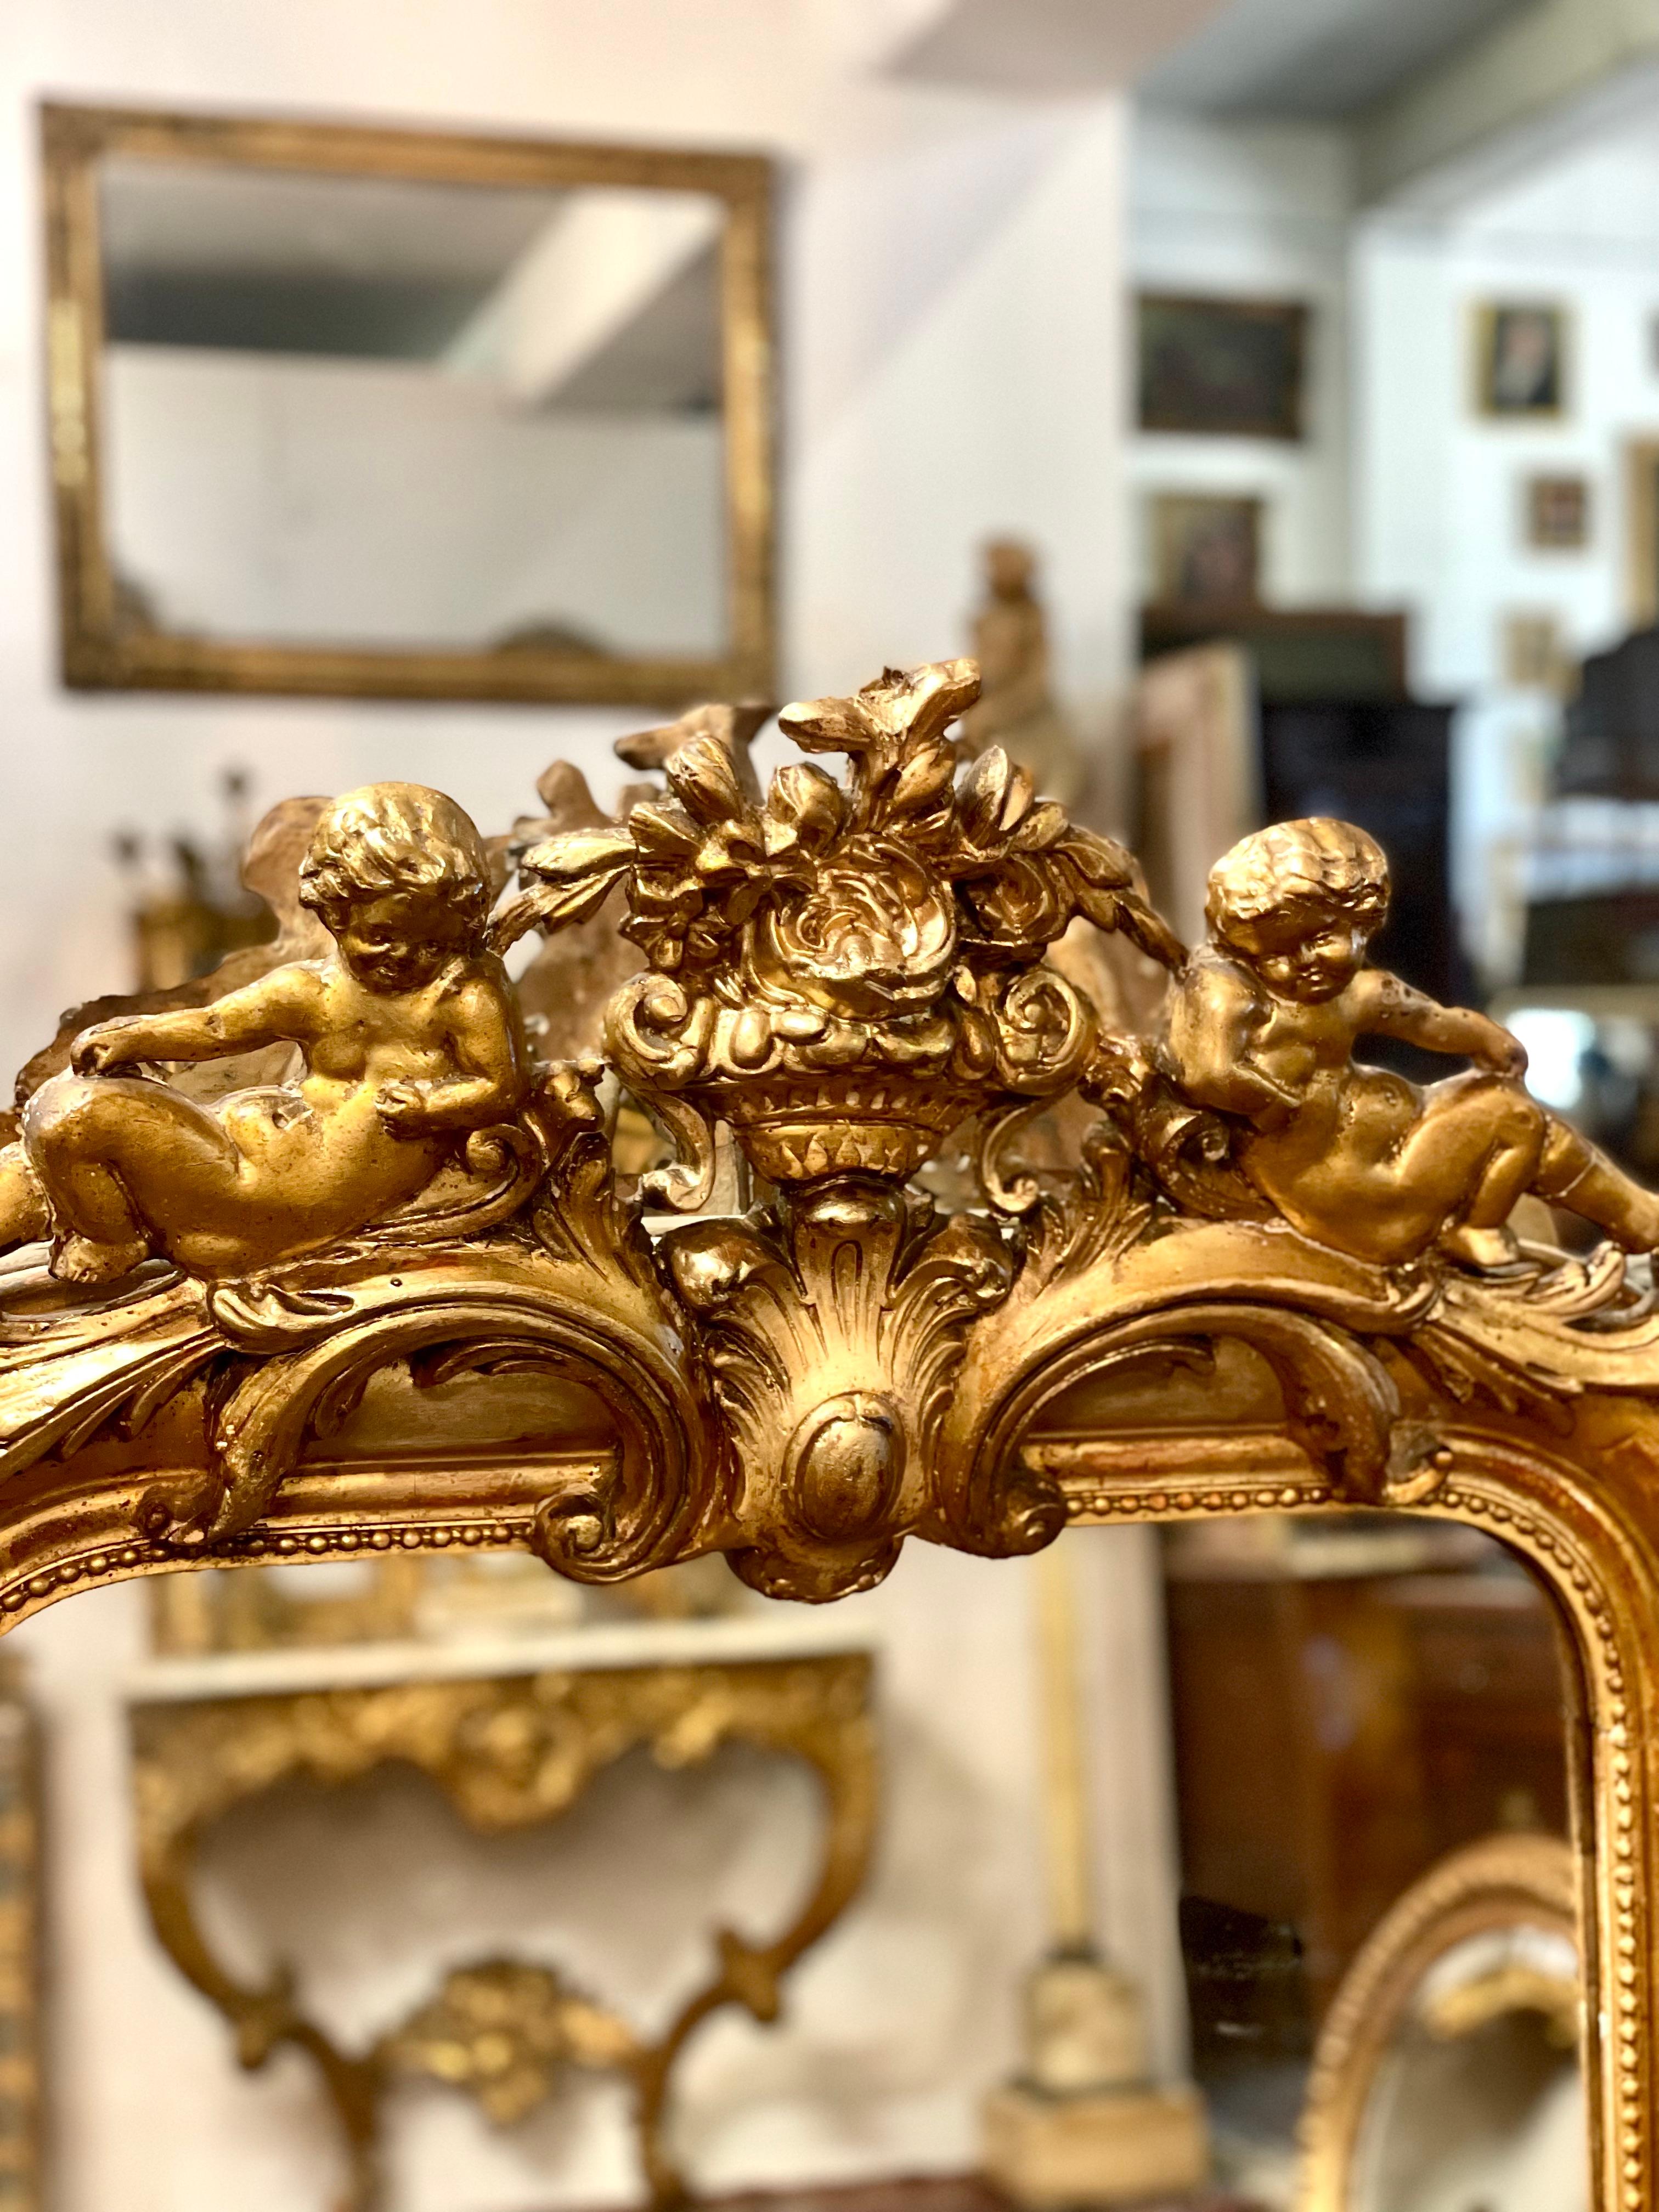 A wonderful Louis Philippe giltwood mirror, dating from the later part of the 19th century, with the signature rounded upper corners and elegant frame so reminiscent of the period. This imposing wall mirror is surmounted by an ornate crest,